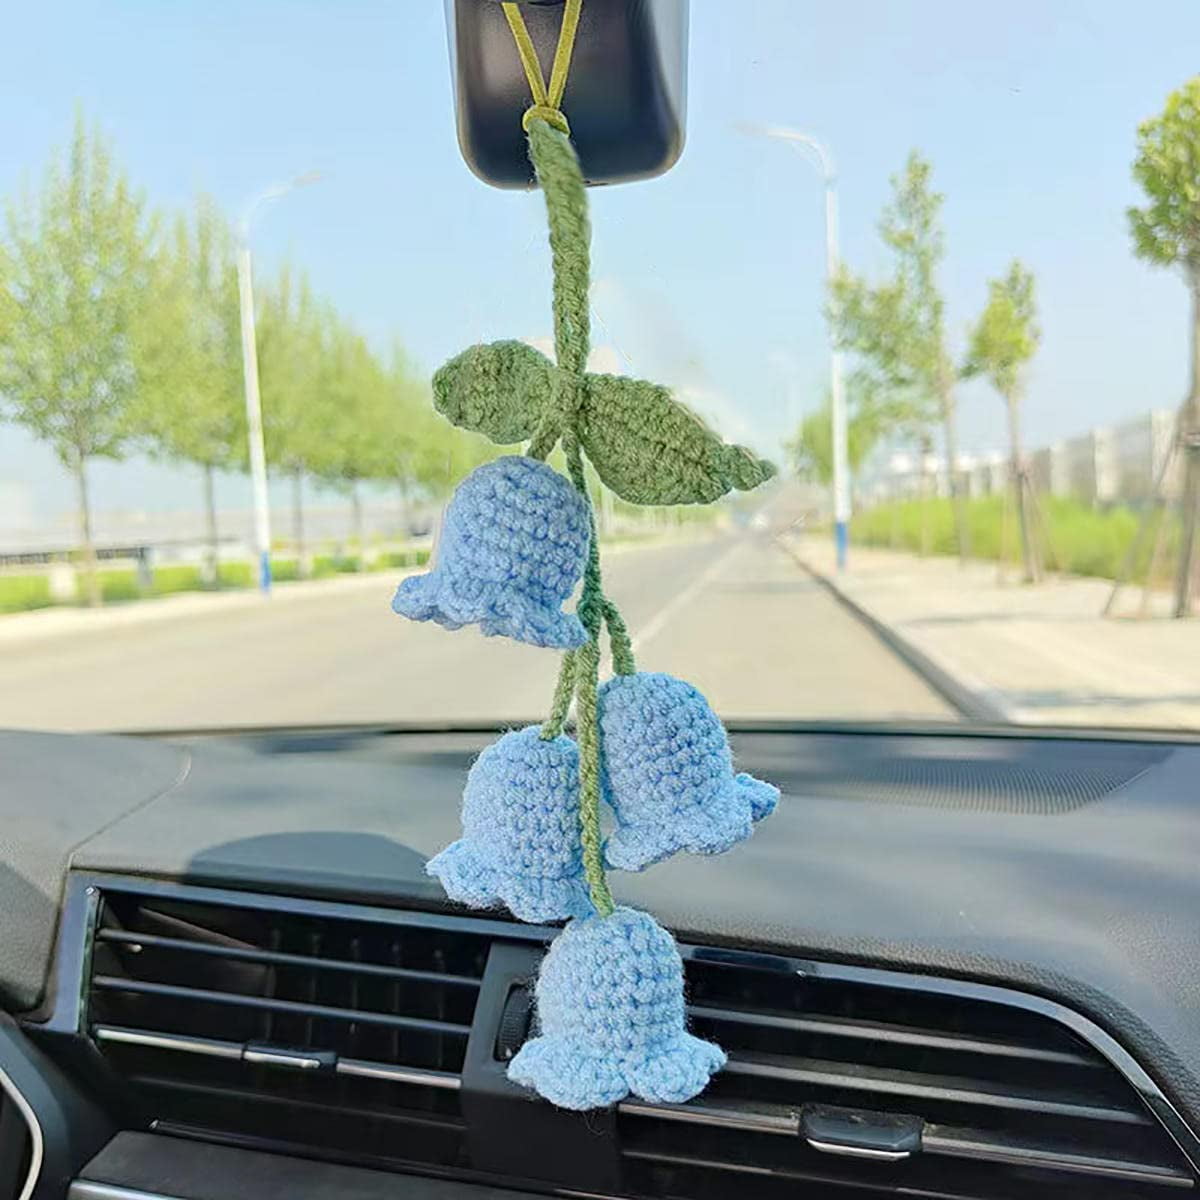 ASYTTY Cute Crochet Car Hanging Ornament for Car Rearview Mirror